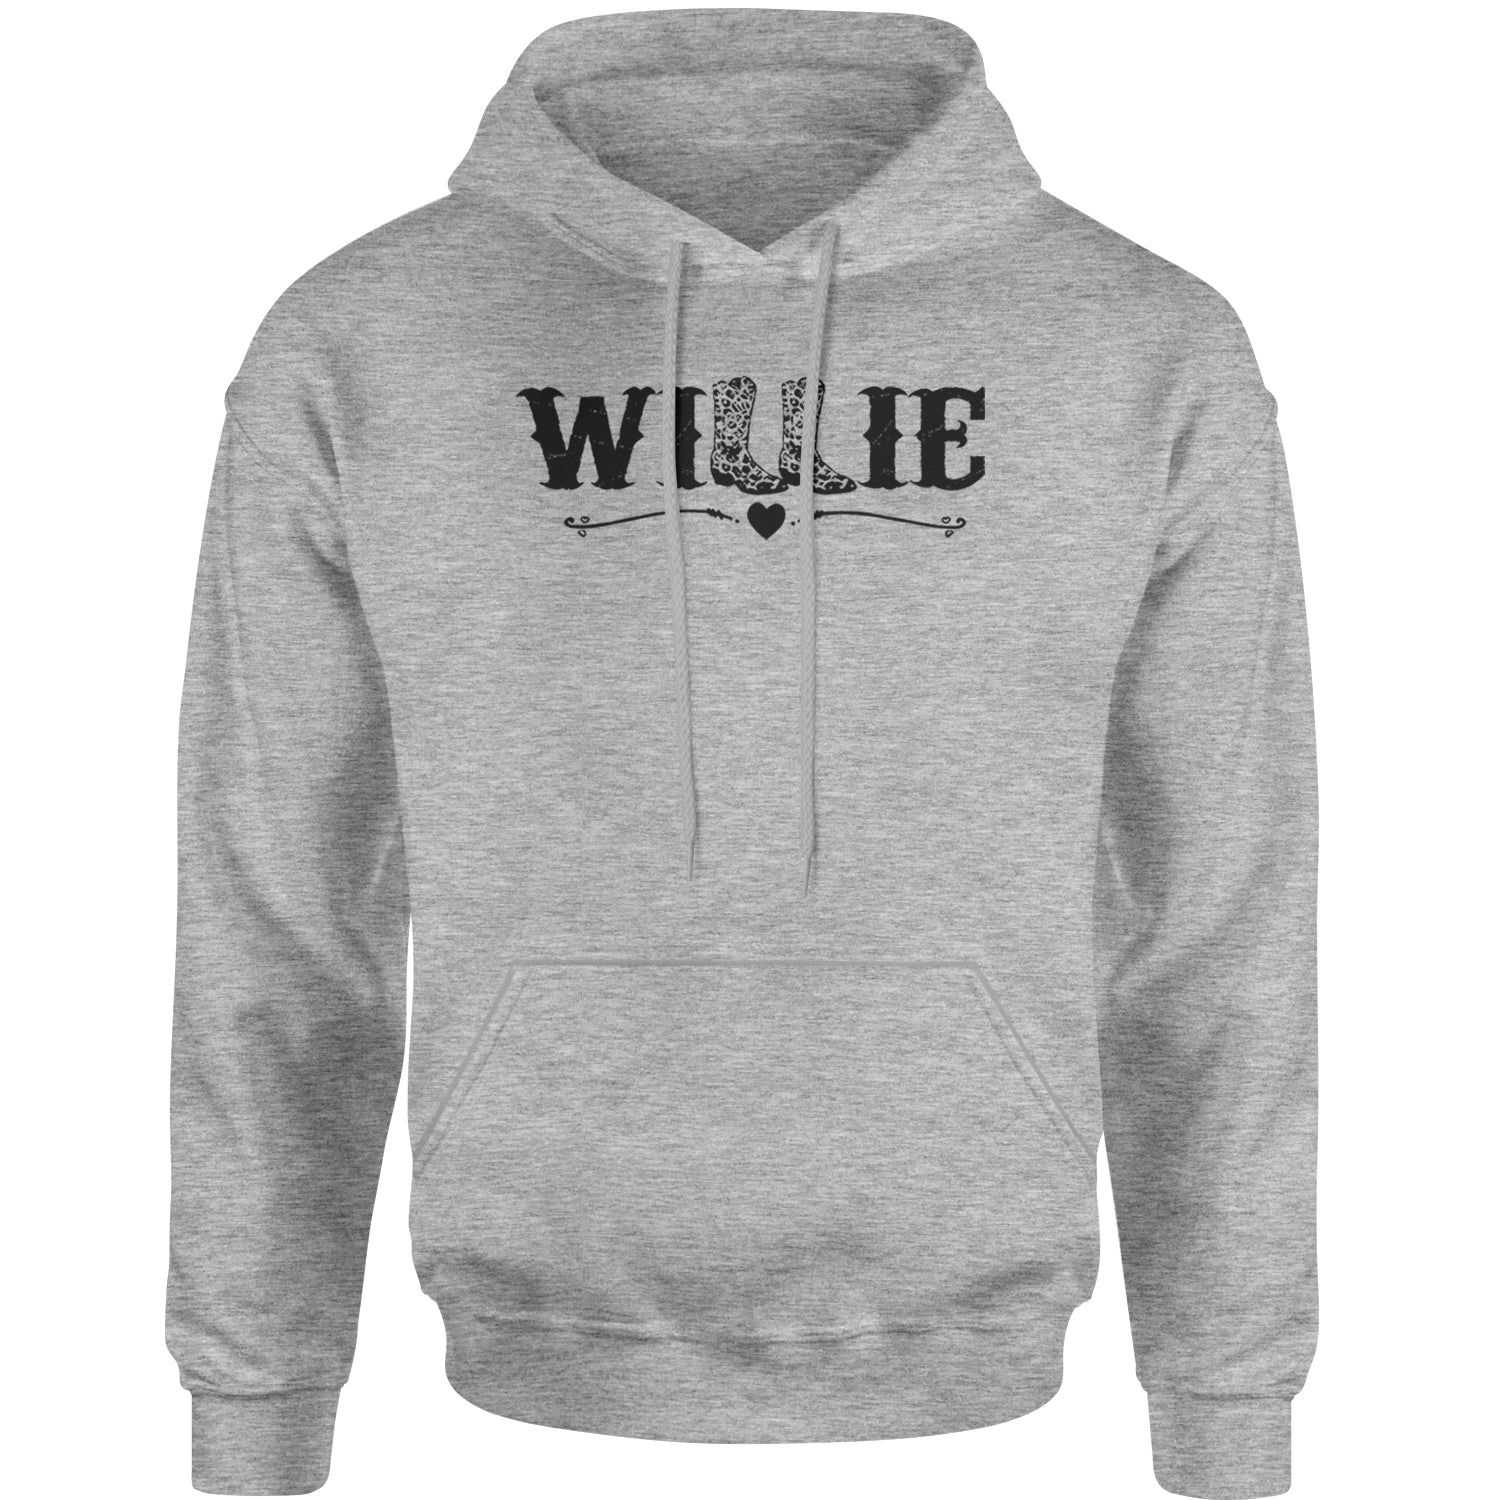 Willie Cowboy Boots Hippy Country Music Adult Hoodie Sweatshirt